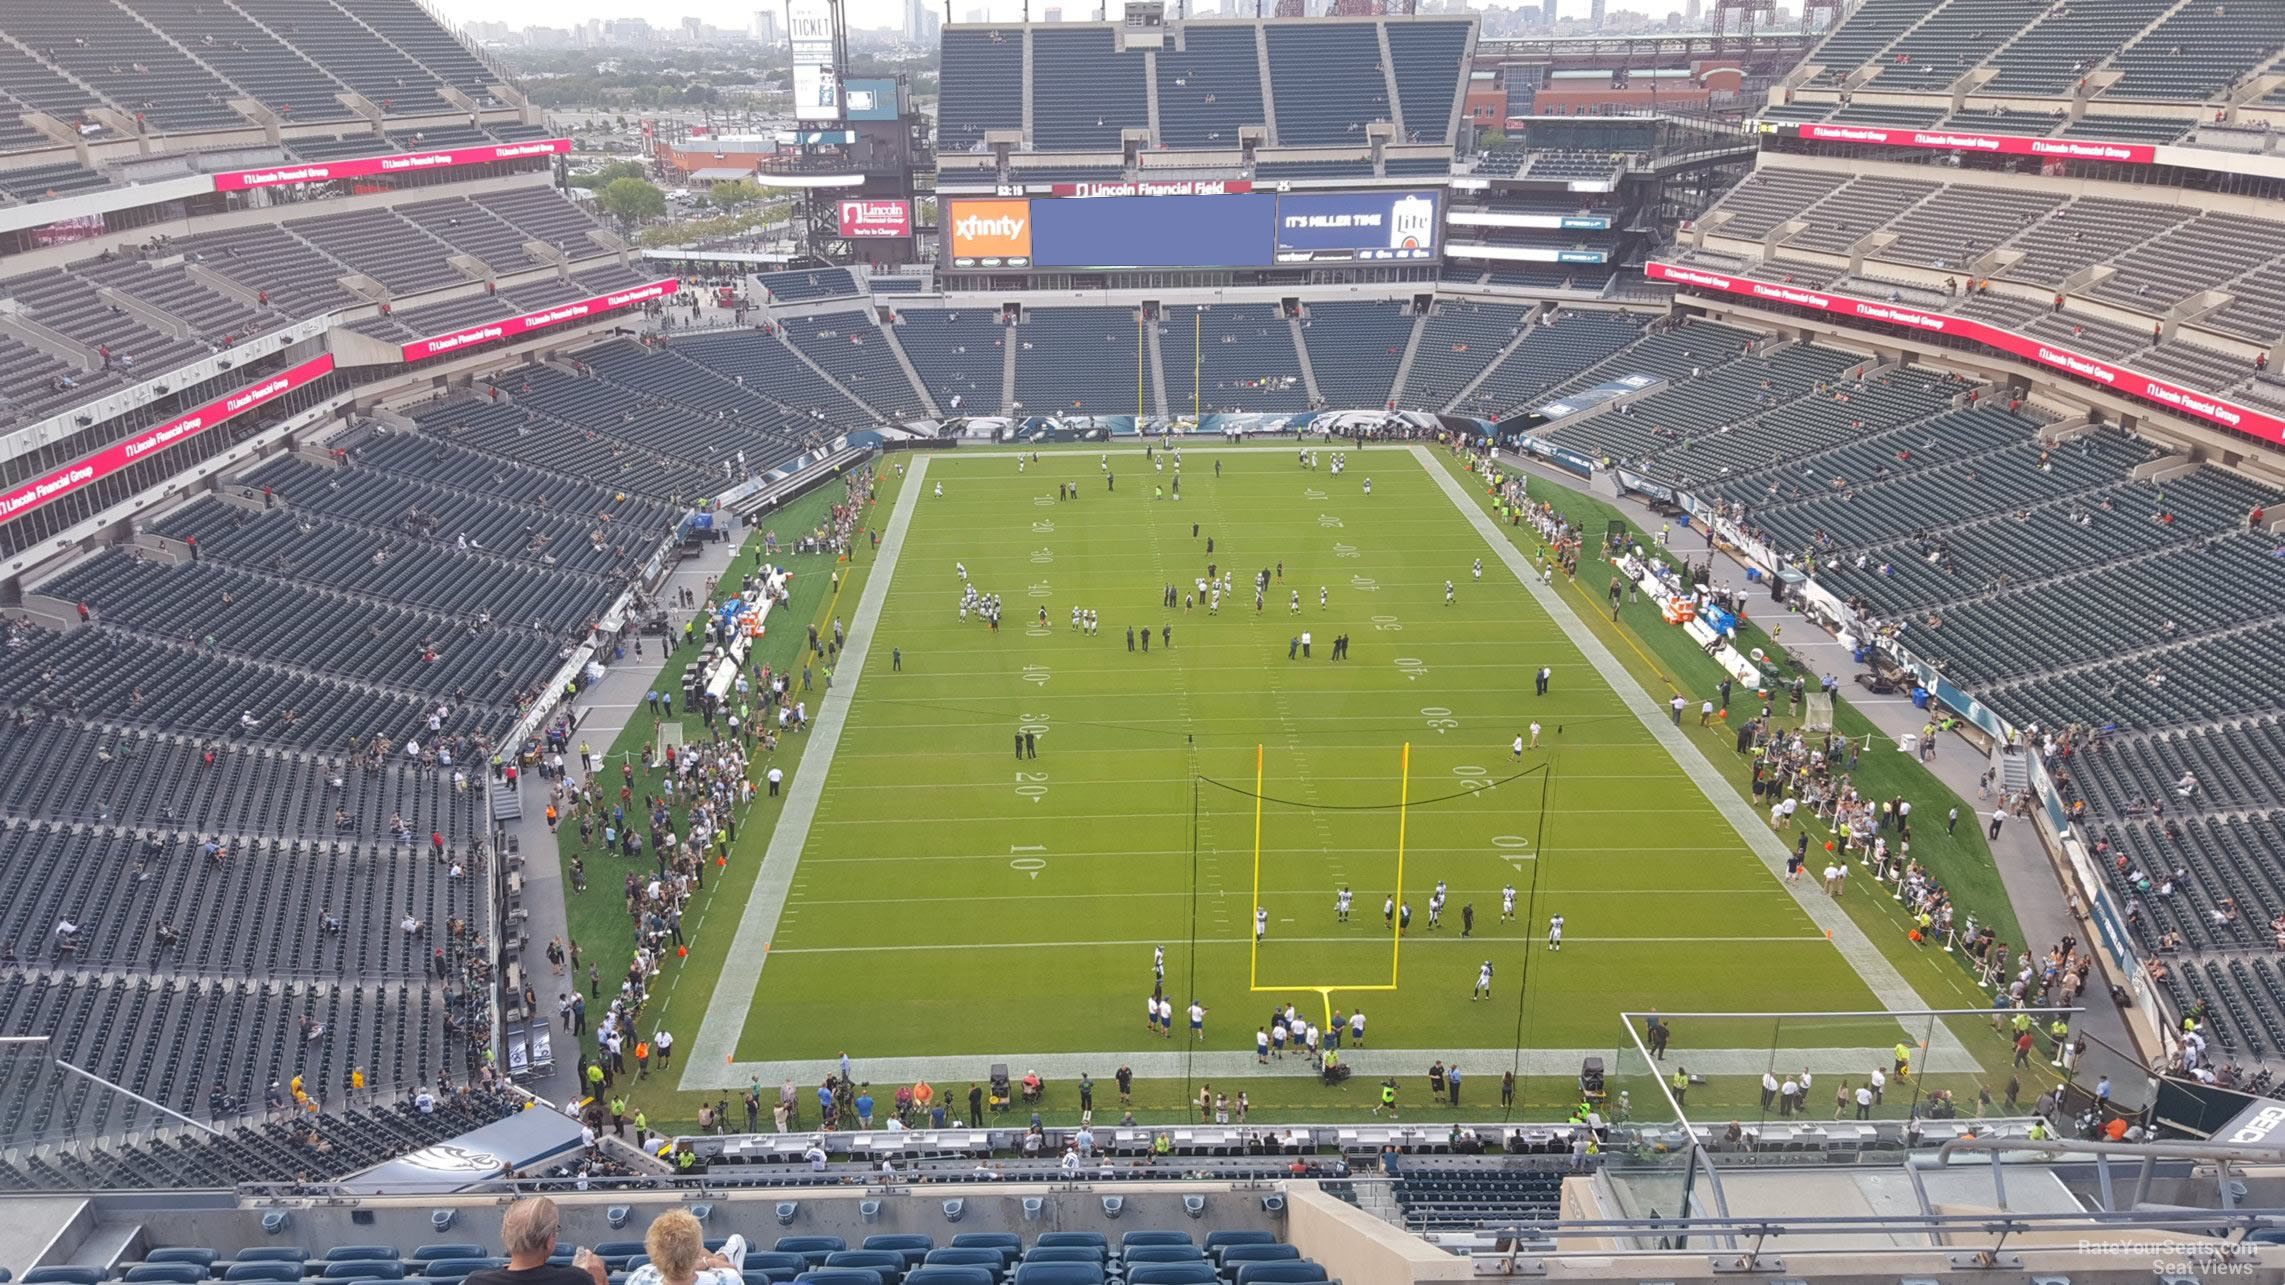 section 211, row 15 seat view  for football - lincoln financial field